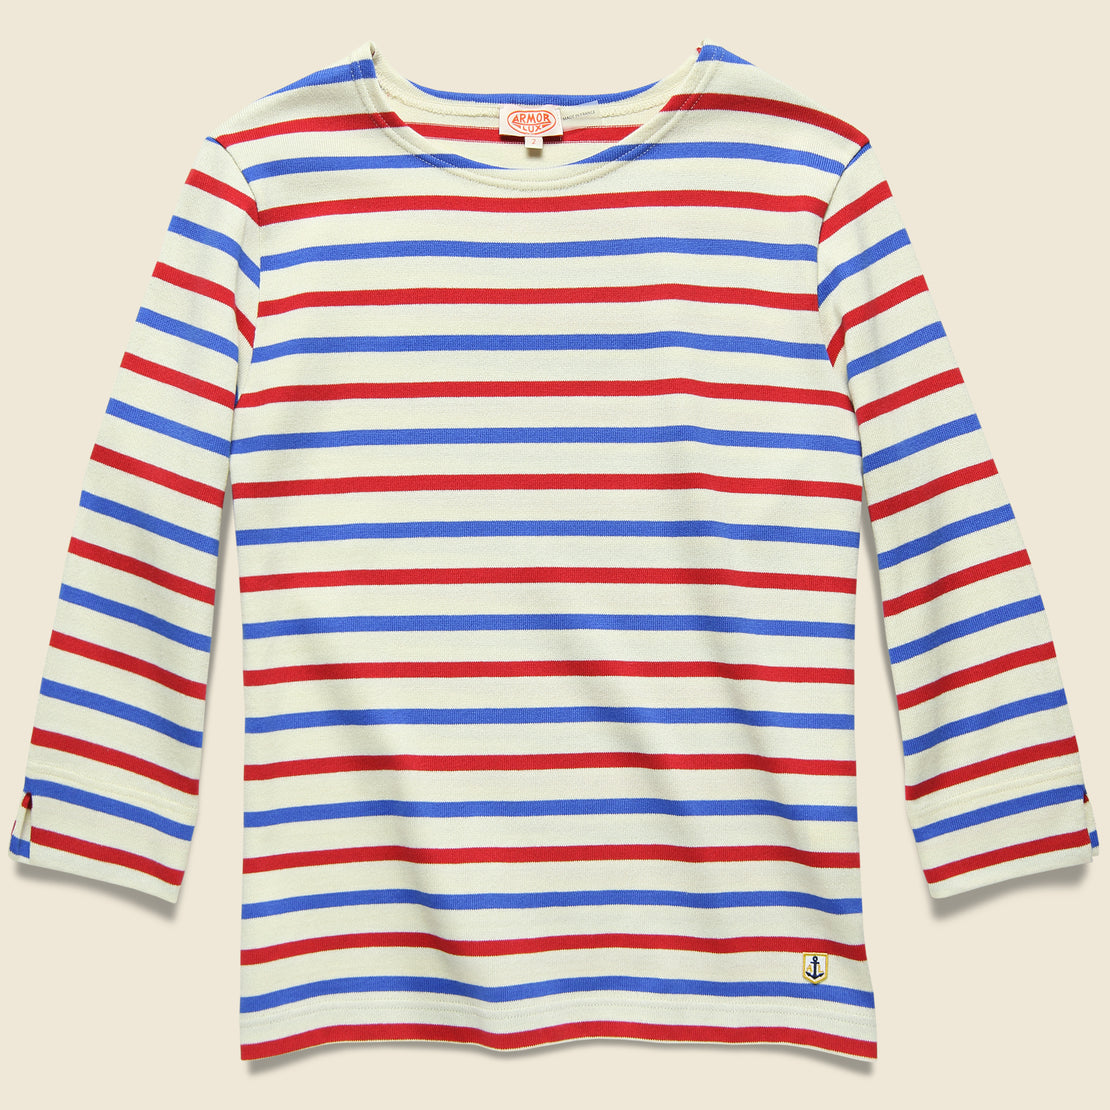 Armor Lux 3/4 Sleeve Marine Stripe Top - Natural/Red/Blue